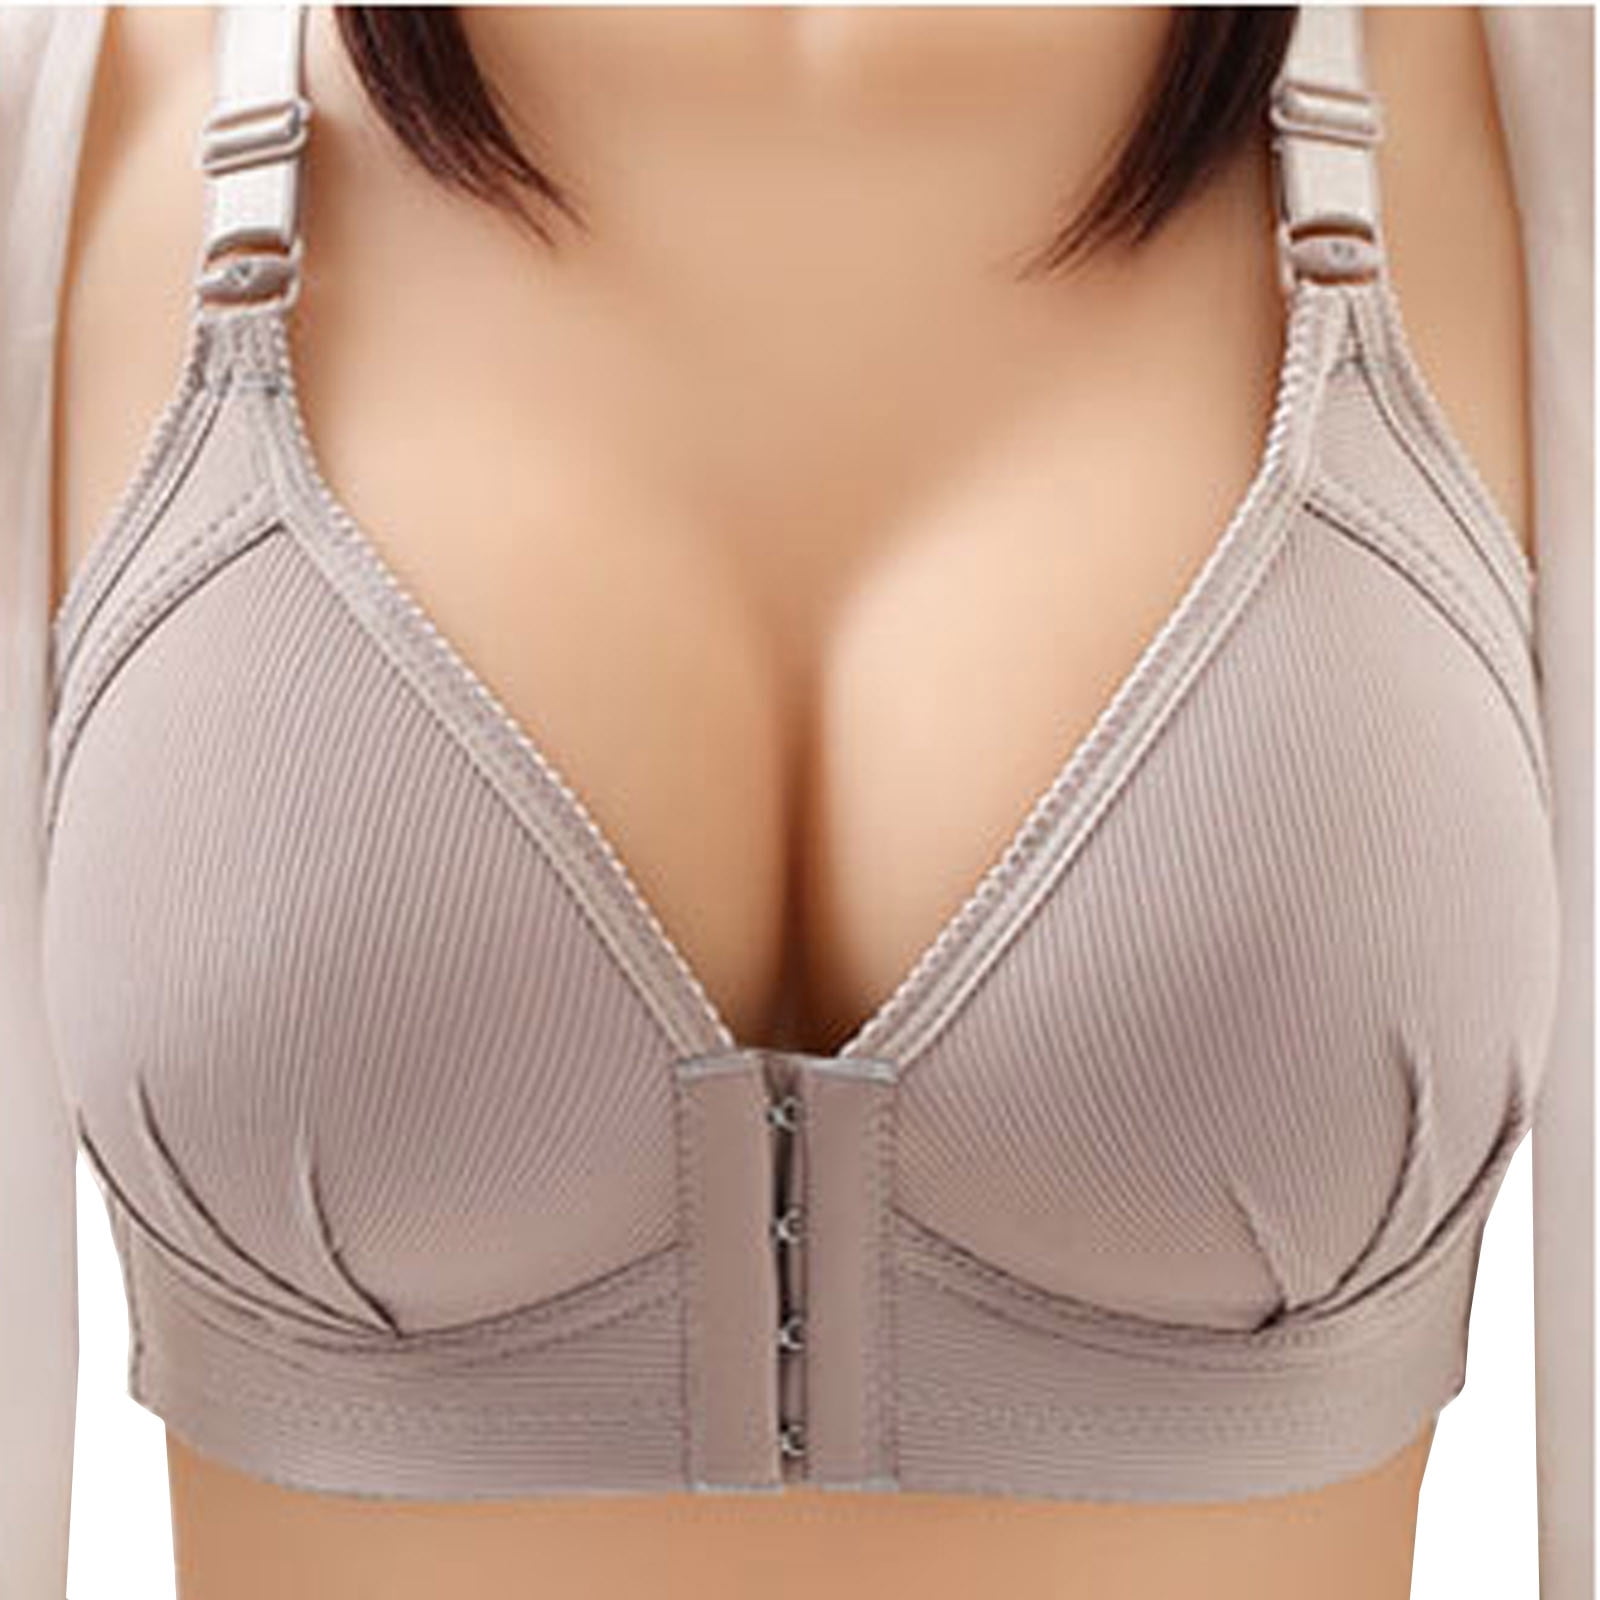 Xysaqa Front Closure Bras for Women Push Up Wireless Bra Seamless Comfy  Full-Coverage Brassiere Plus Size Everyday Wear 